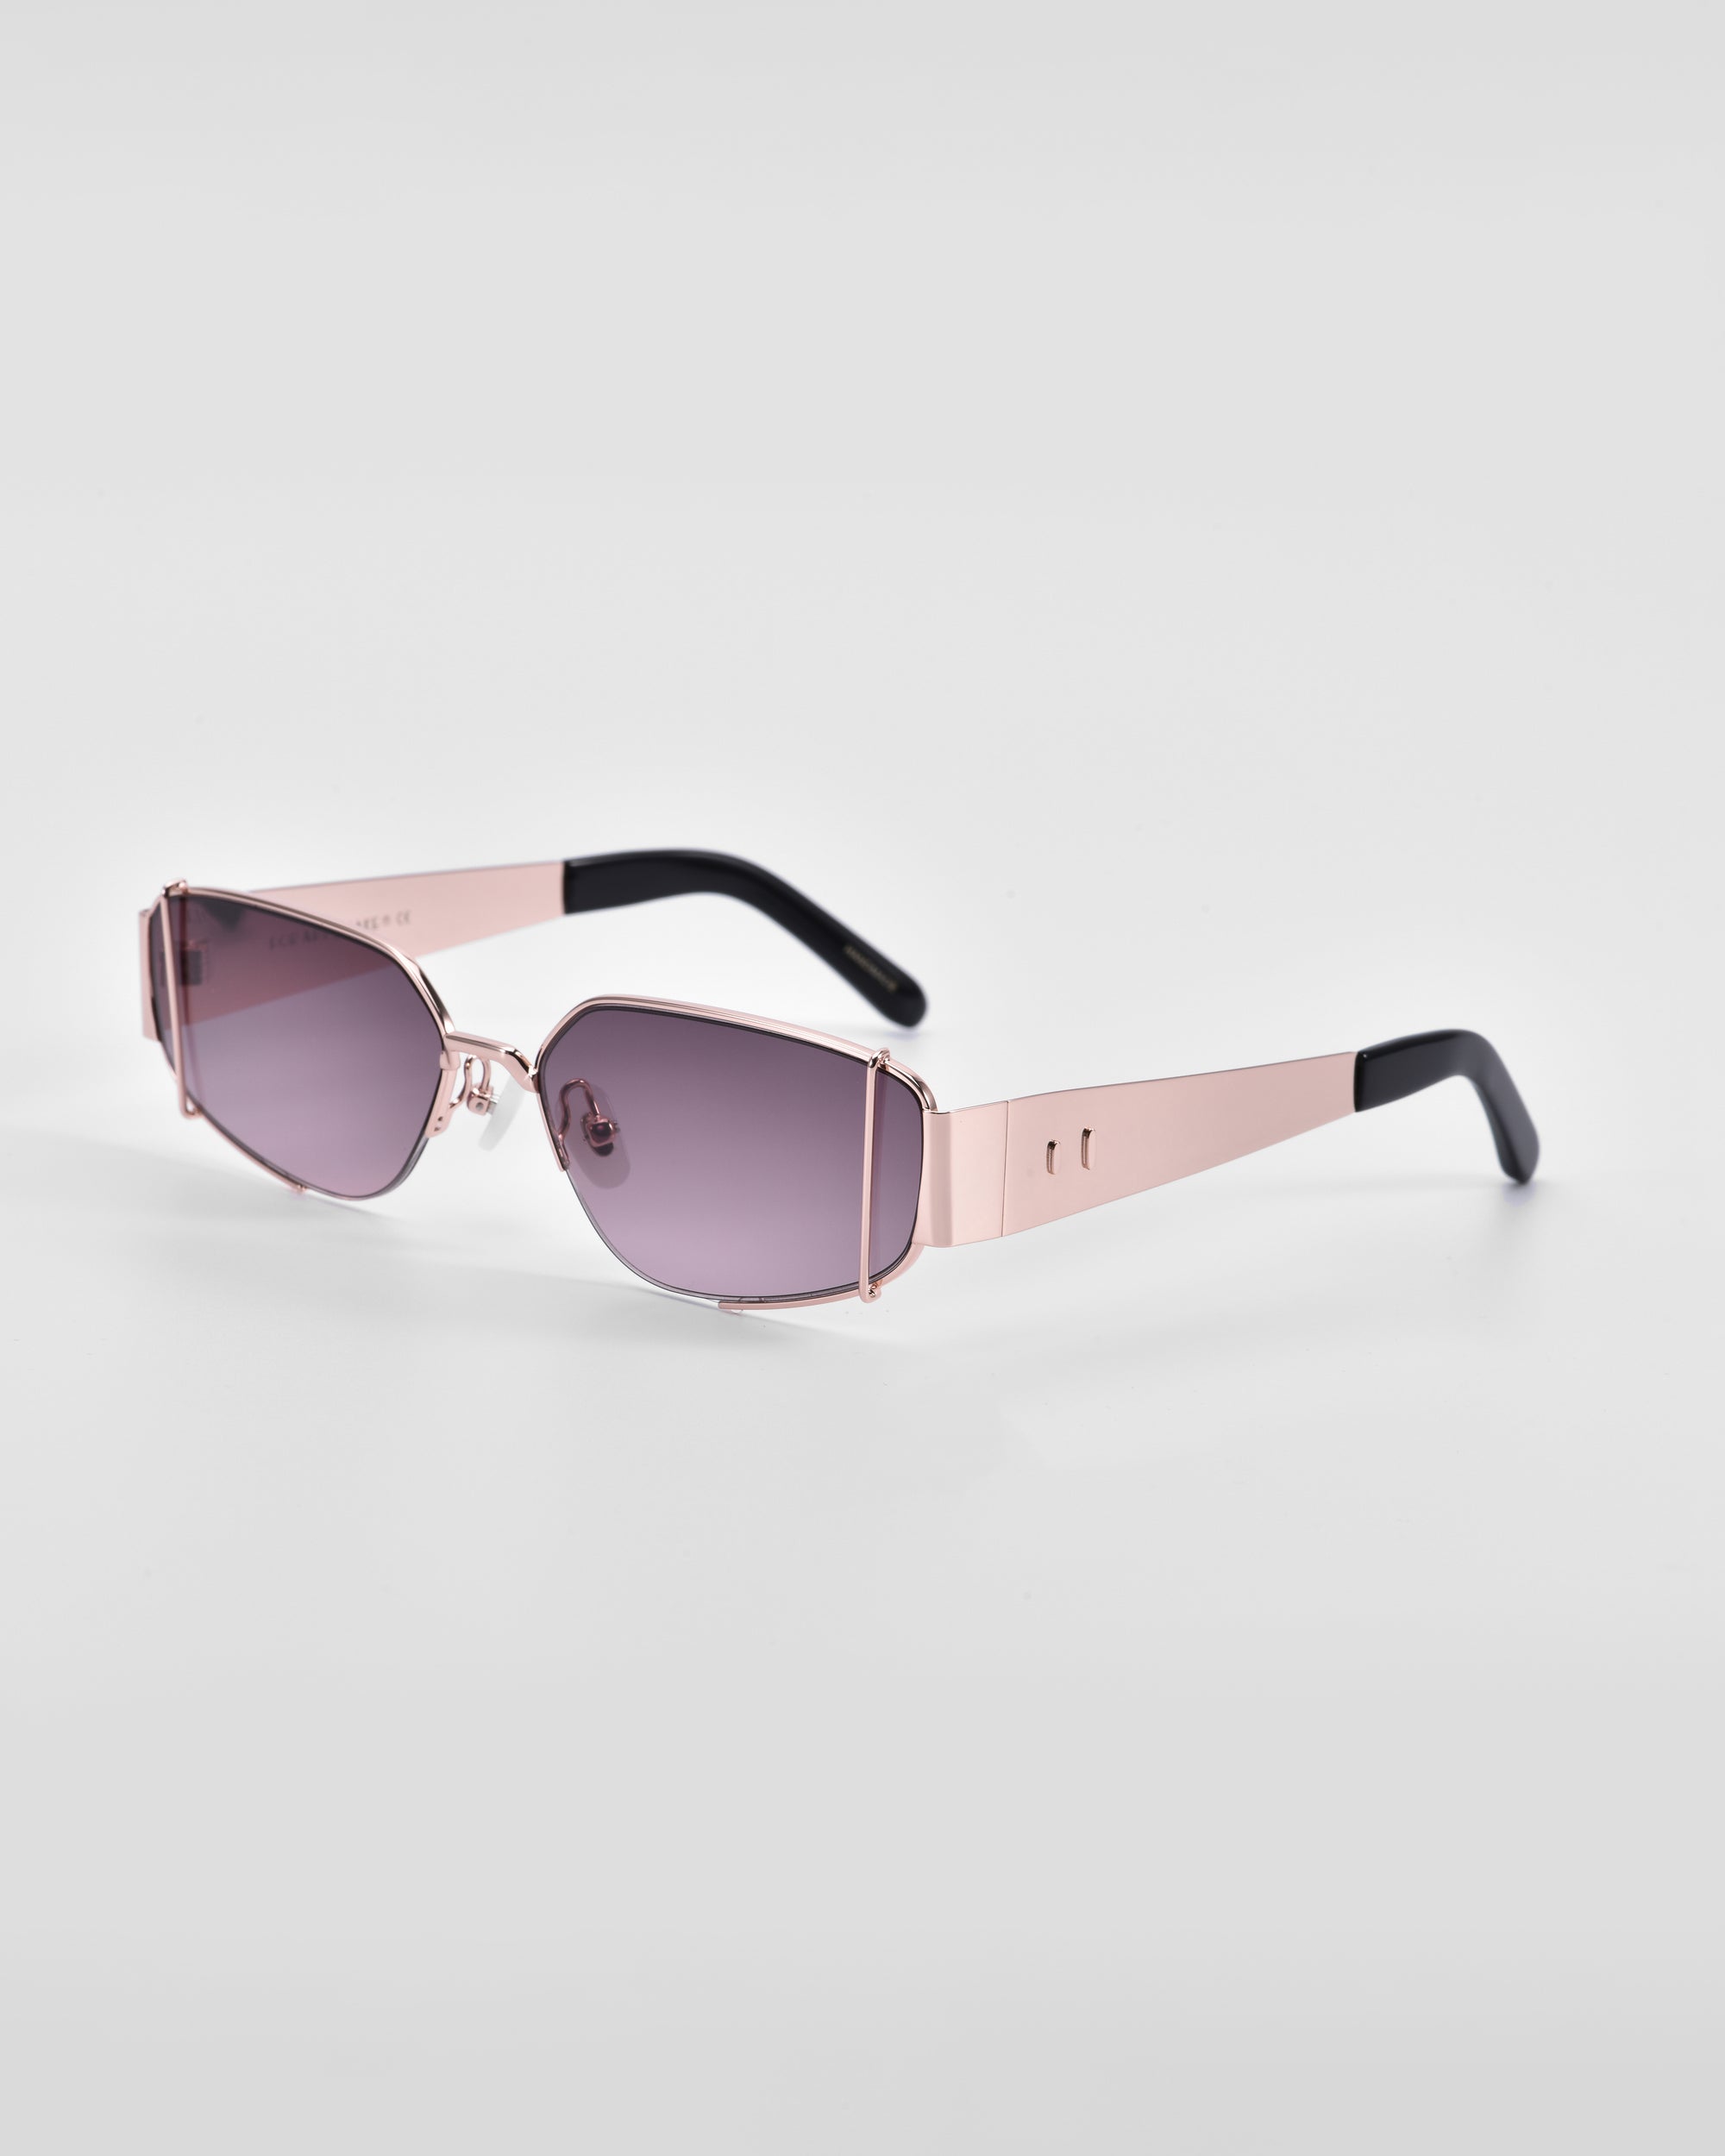 A pair of stylish sunglasses featuring rectangular, purple-tinted lenses and stunning 18-karat gold metal frames with black temple tips. The design is modern and sleek with thin, minimalist arms and clean lines, set against a plain white background. Presenting the Talia from For Art's Sake®.